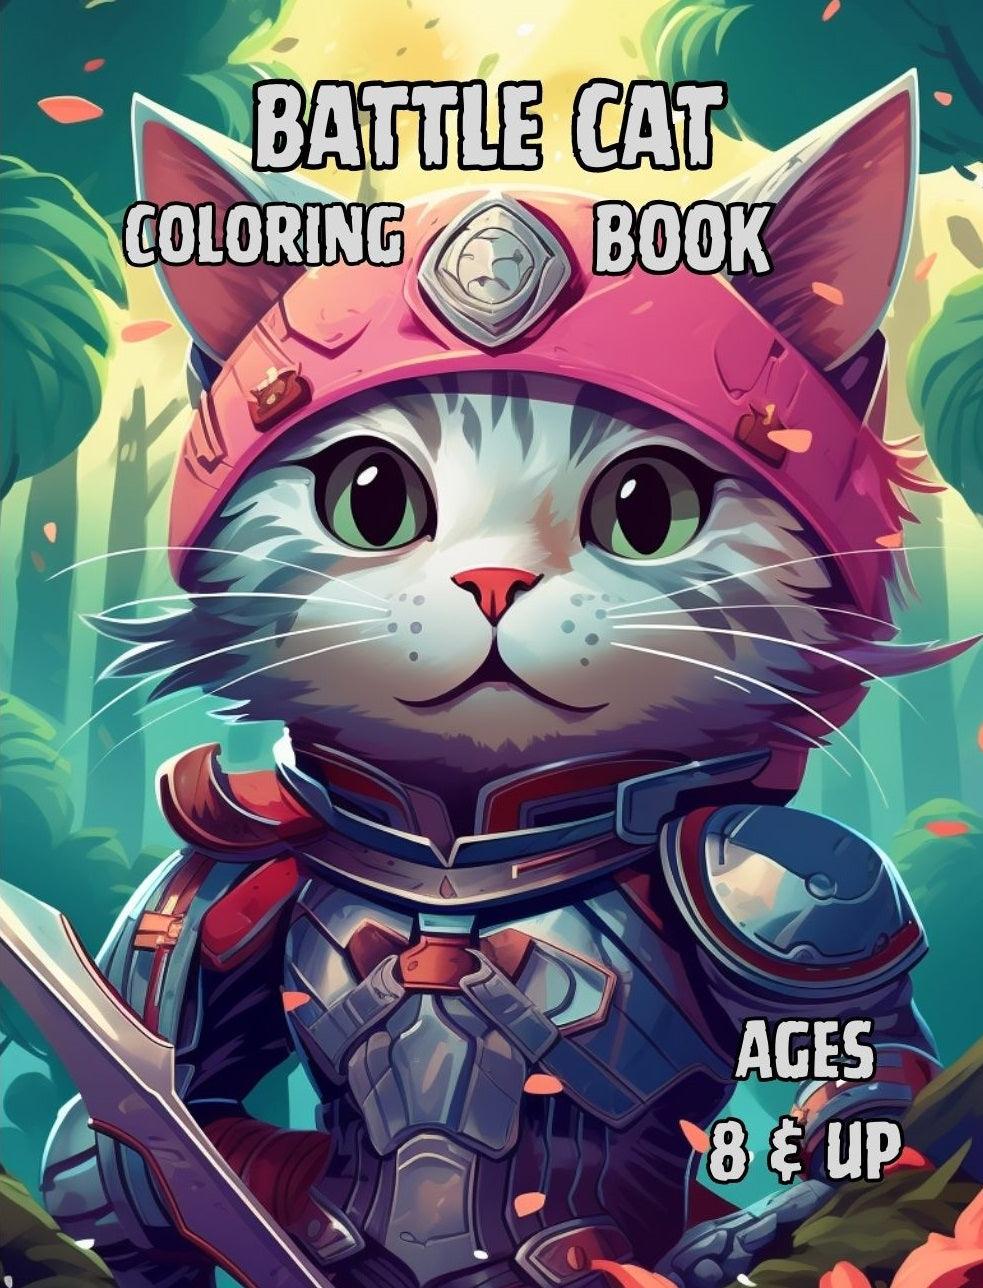 Color Me Kittens: A Purr-fect Adult Coloring Book [Book]